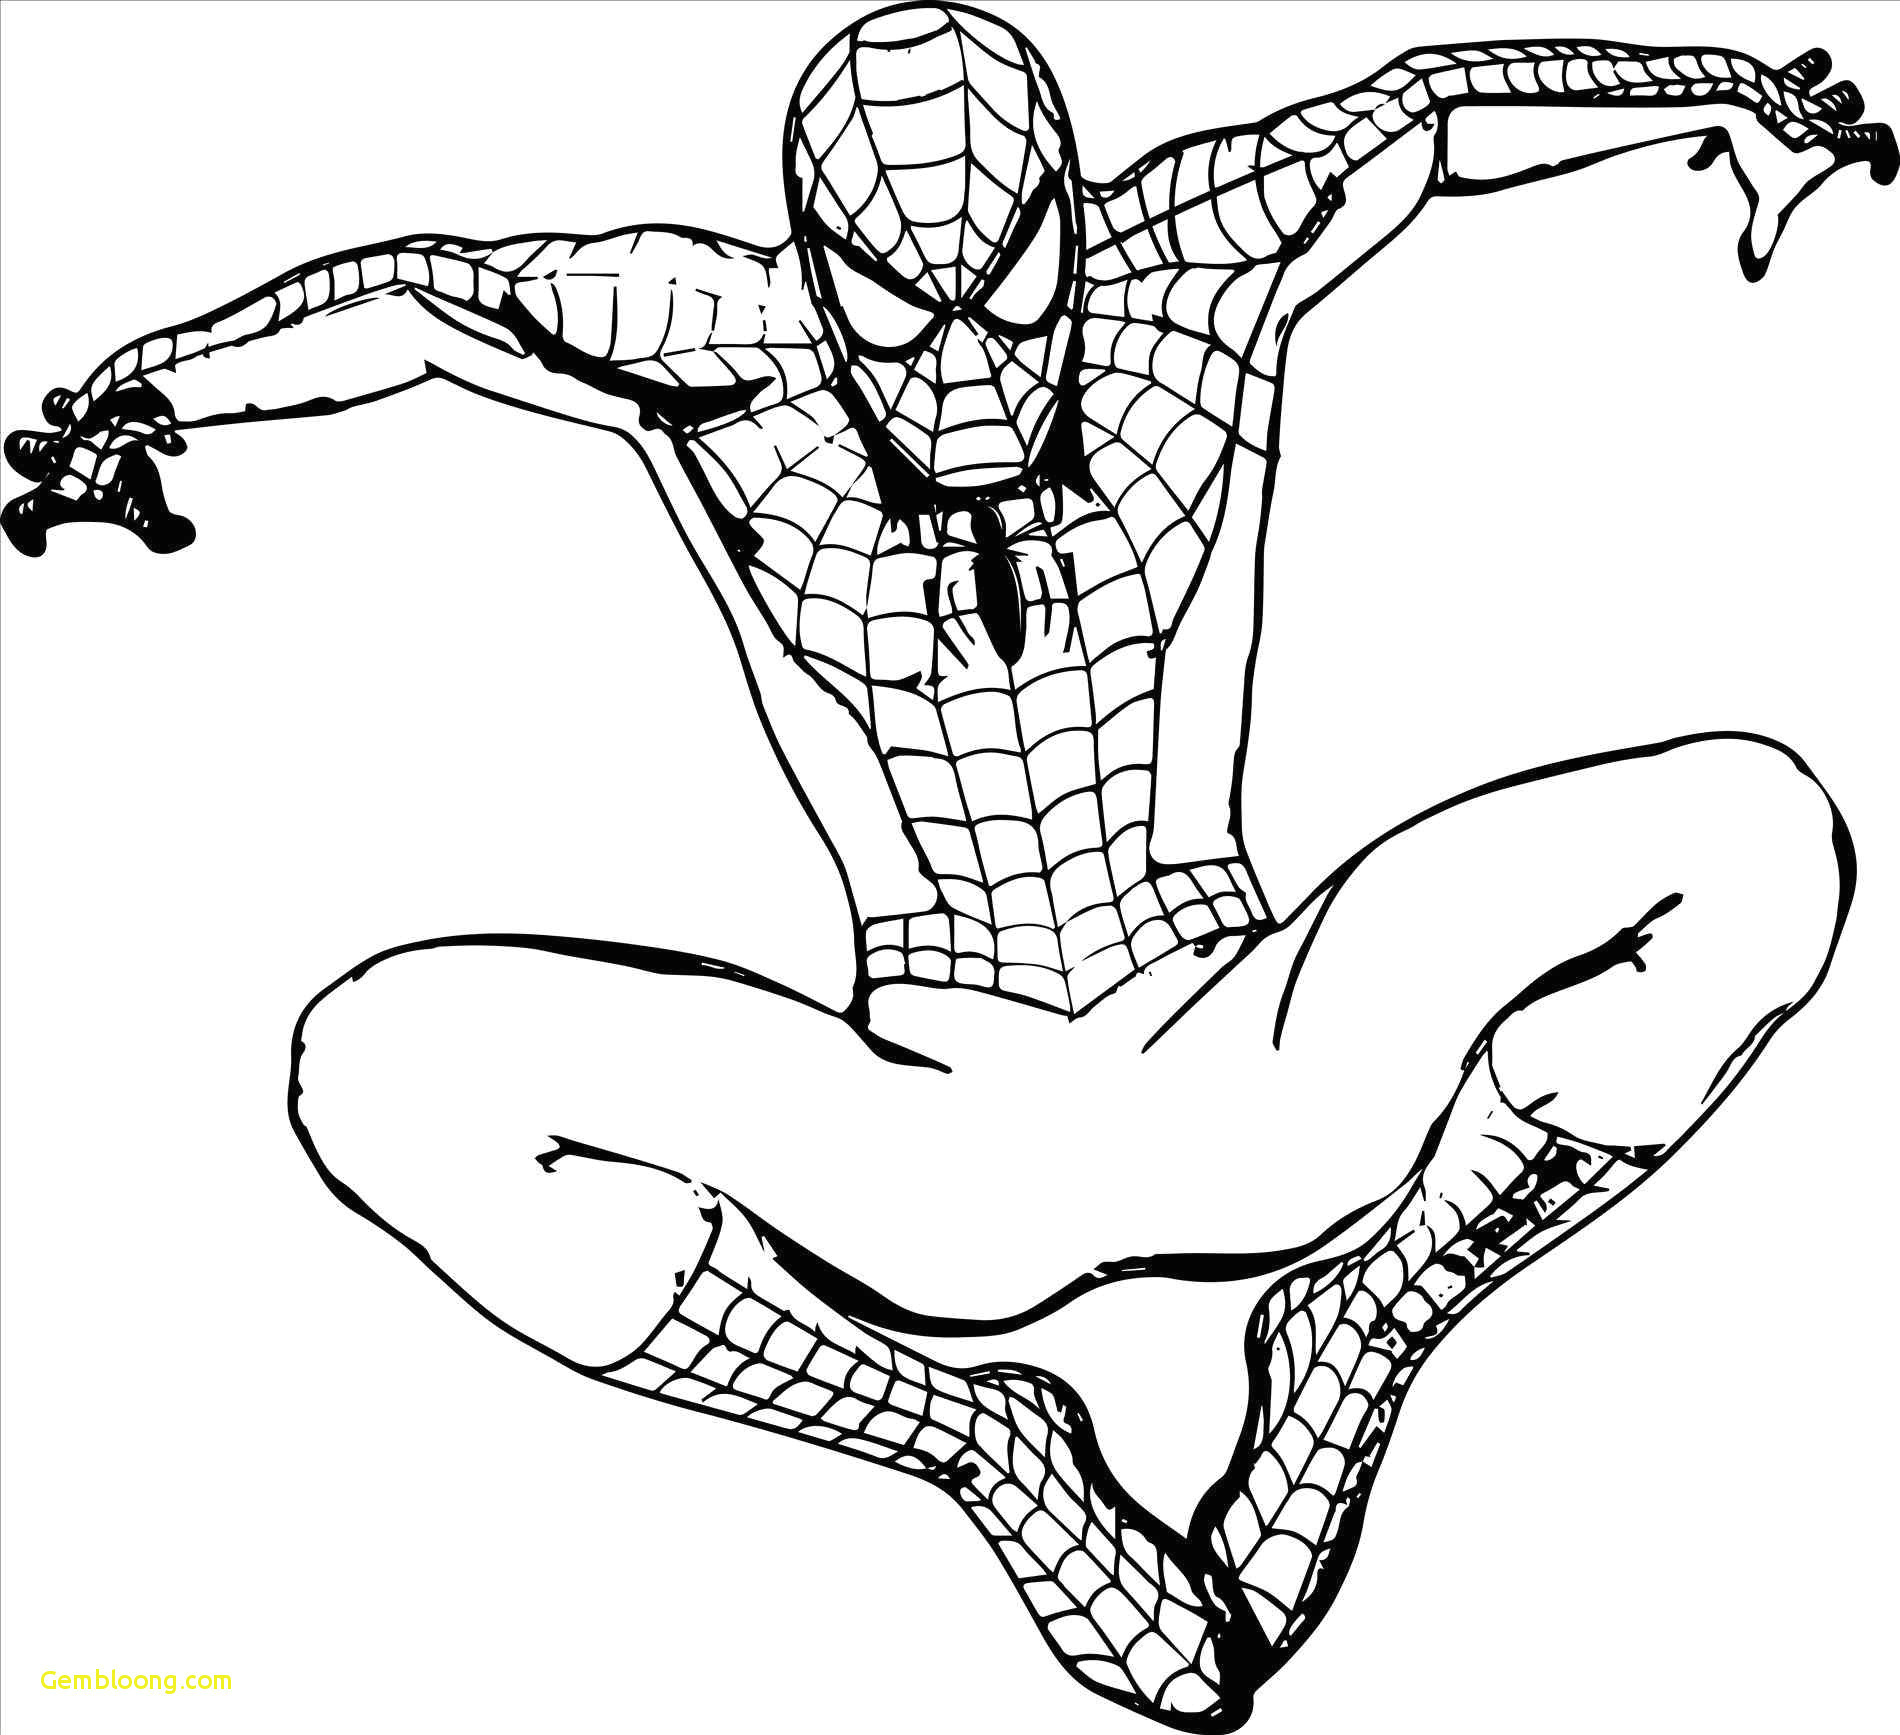 24 how to draw christmas things beautiful superheroes easy to draw spiderman coloring pages luxury 0